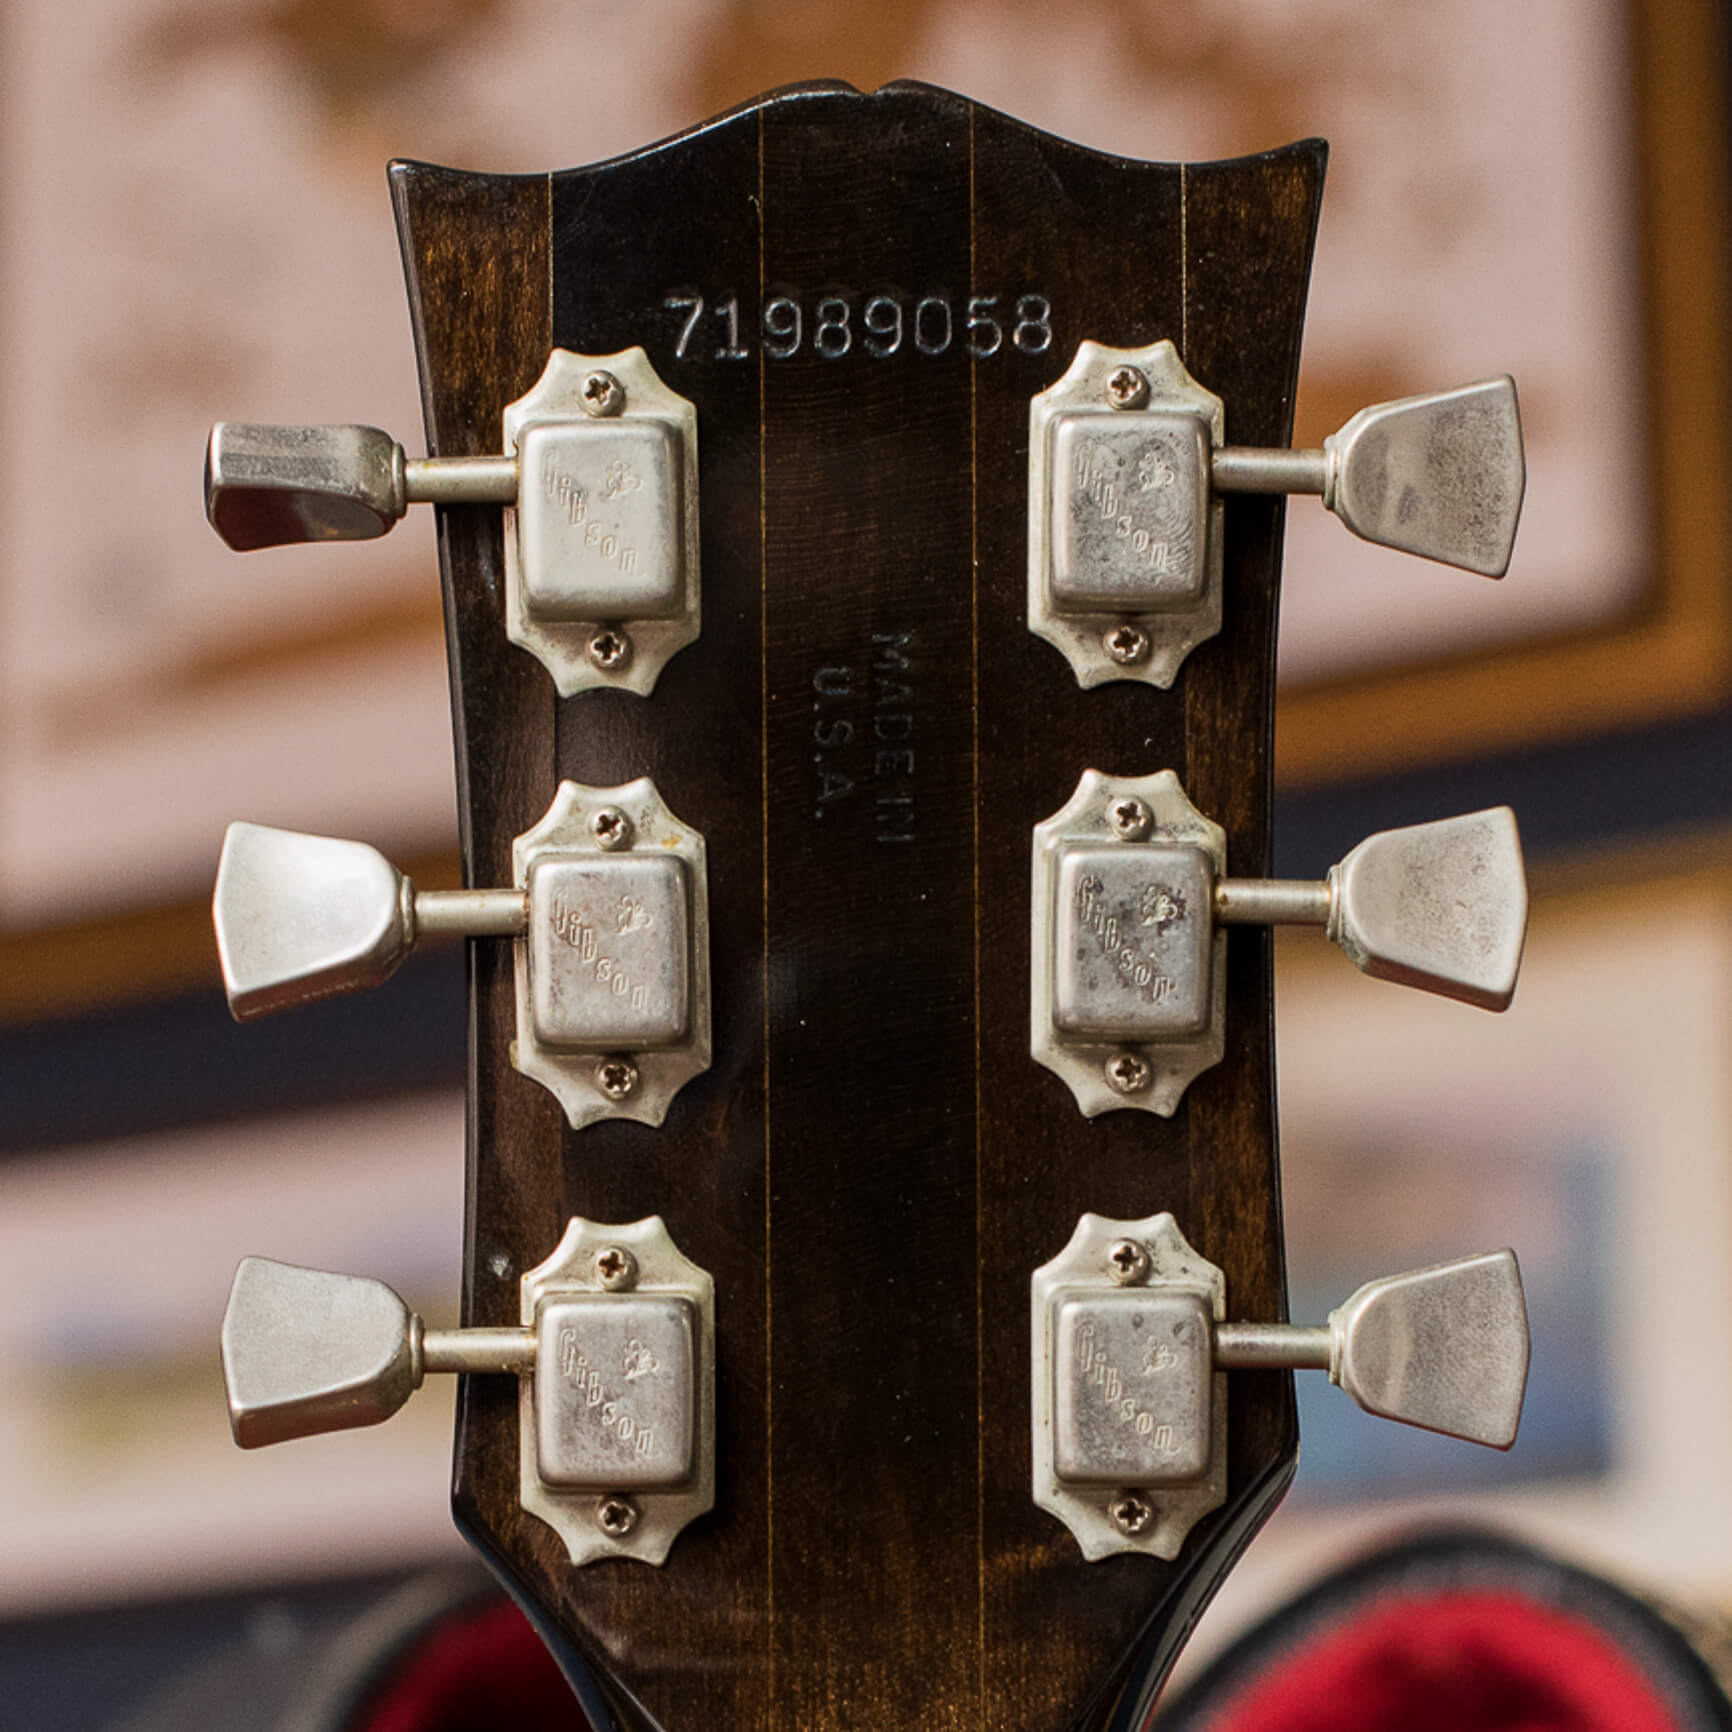 gibson guitar serial number checker